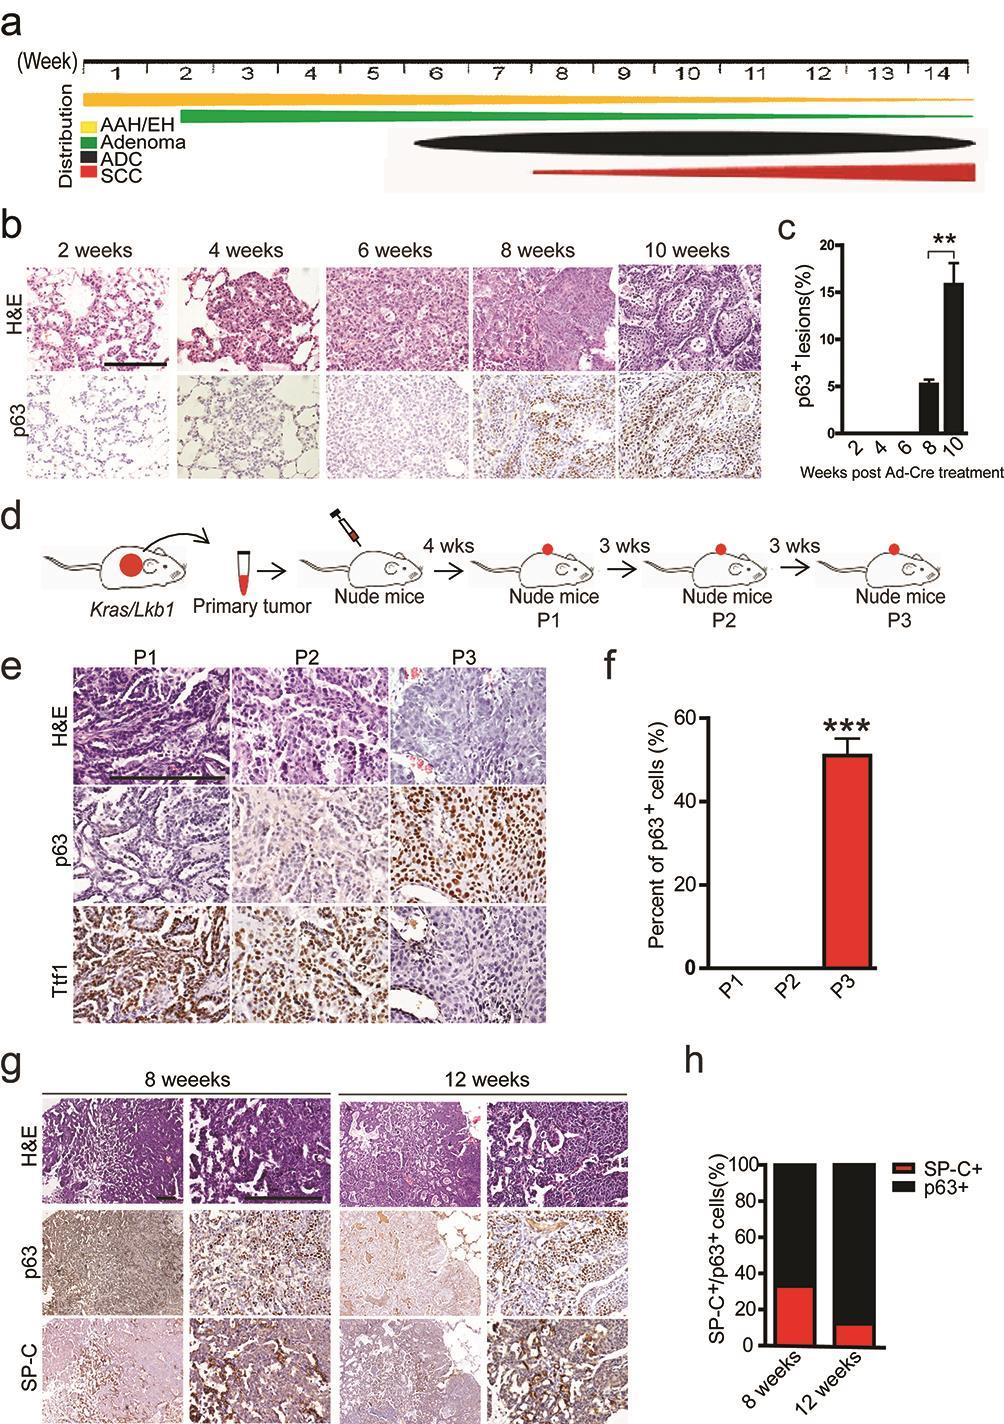 Supplementary Figure 1. Lkb1-deficient lung ADC progressively transdifferentiates into SCC.